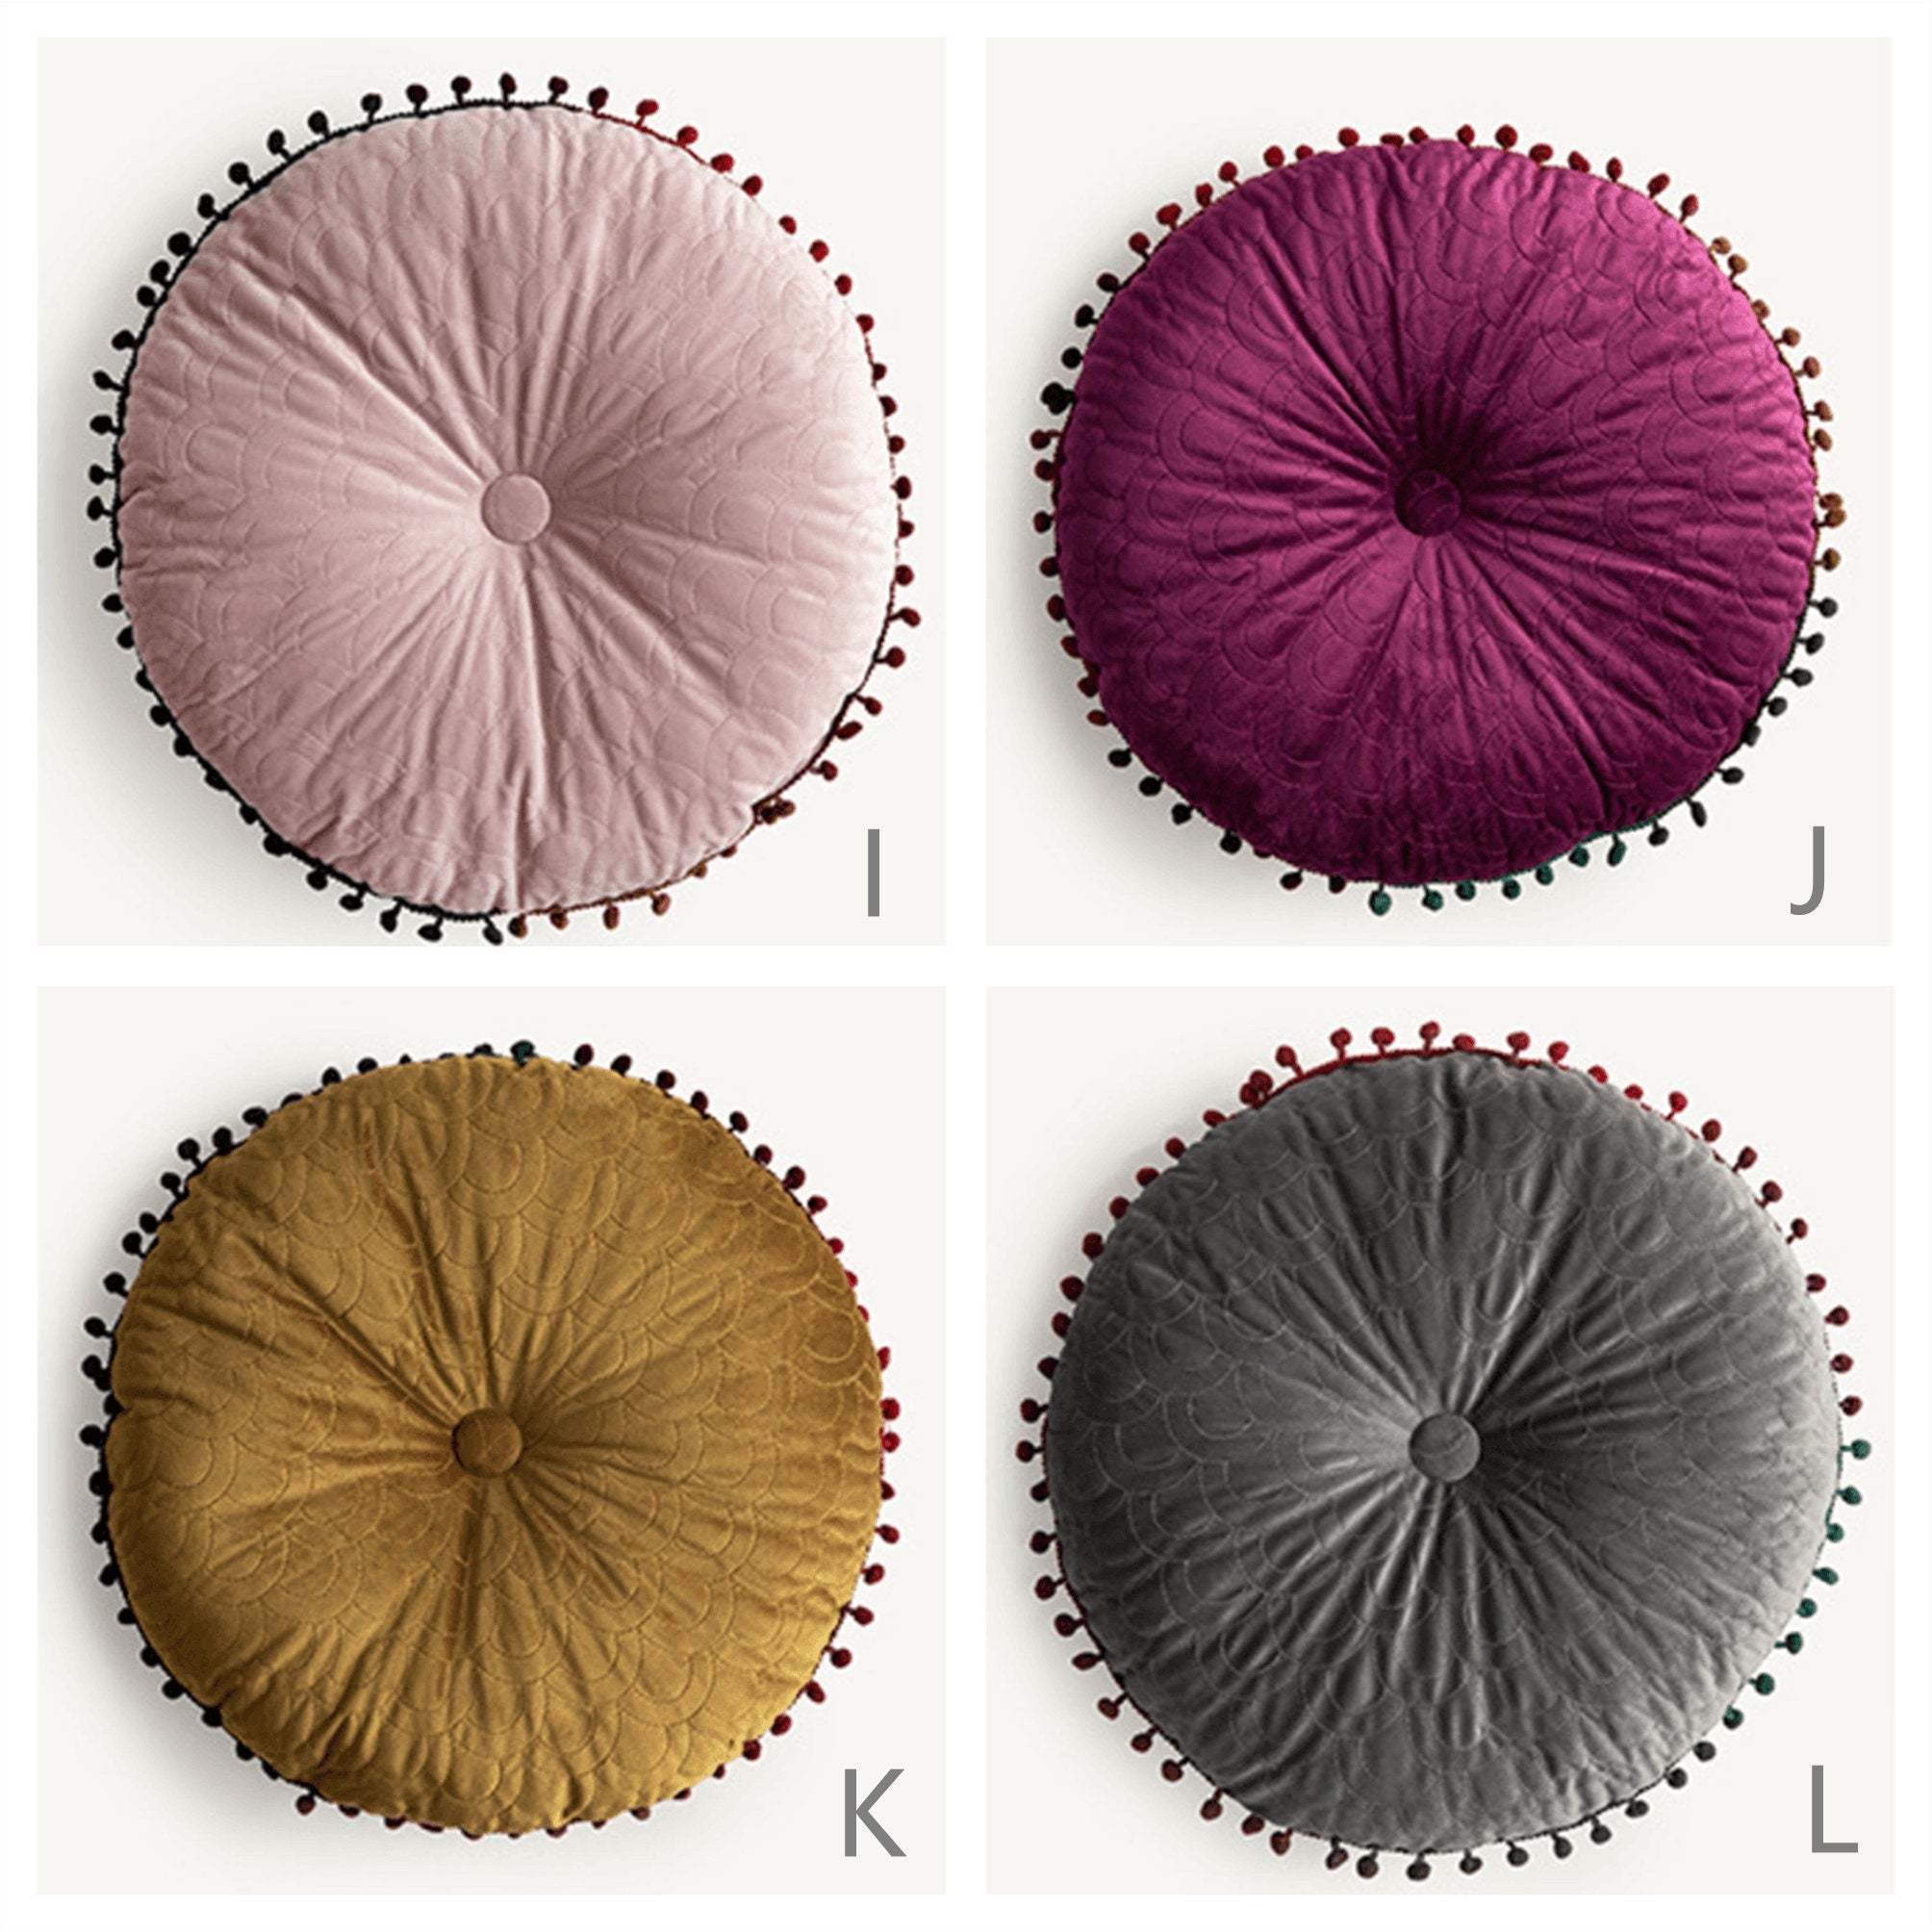 Best seller - Velvet seat cushion-Multi-color velvet sofa cushion- sofa cushion-floor cushion-floor pillow-Circle cushions-thick seat pad